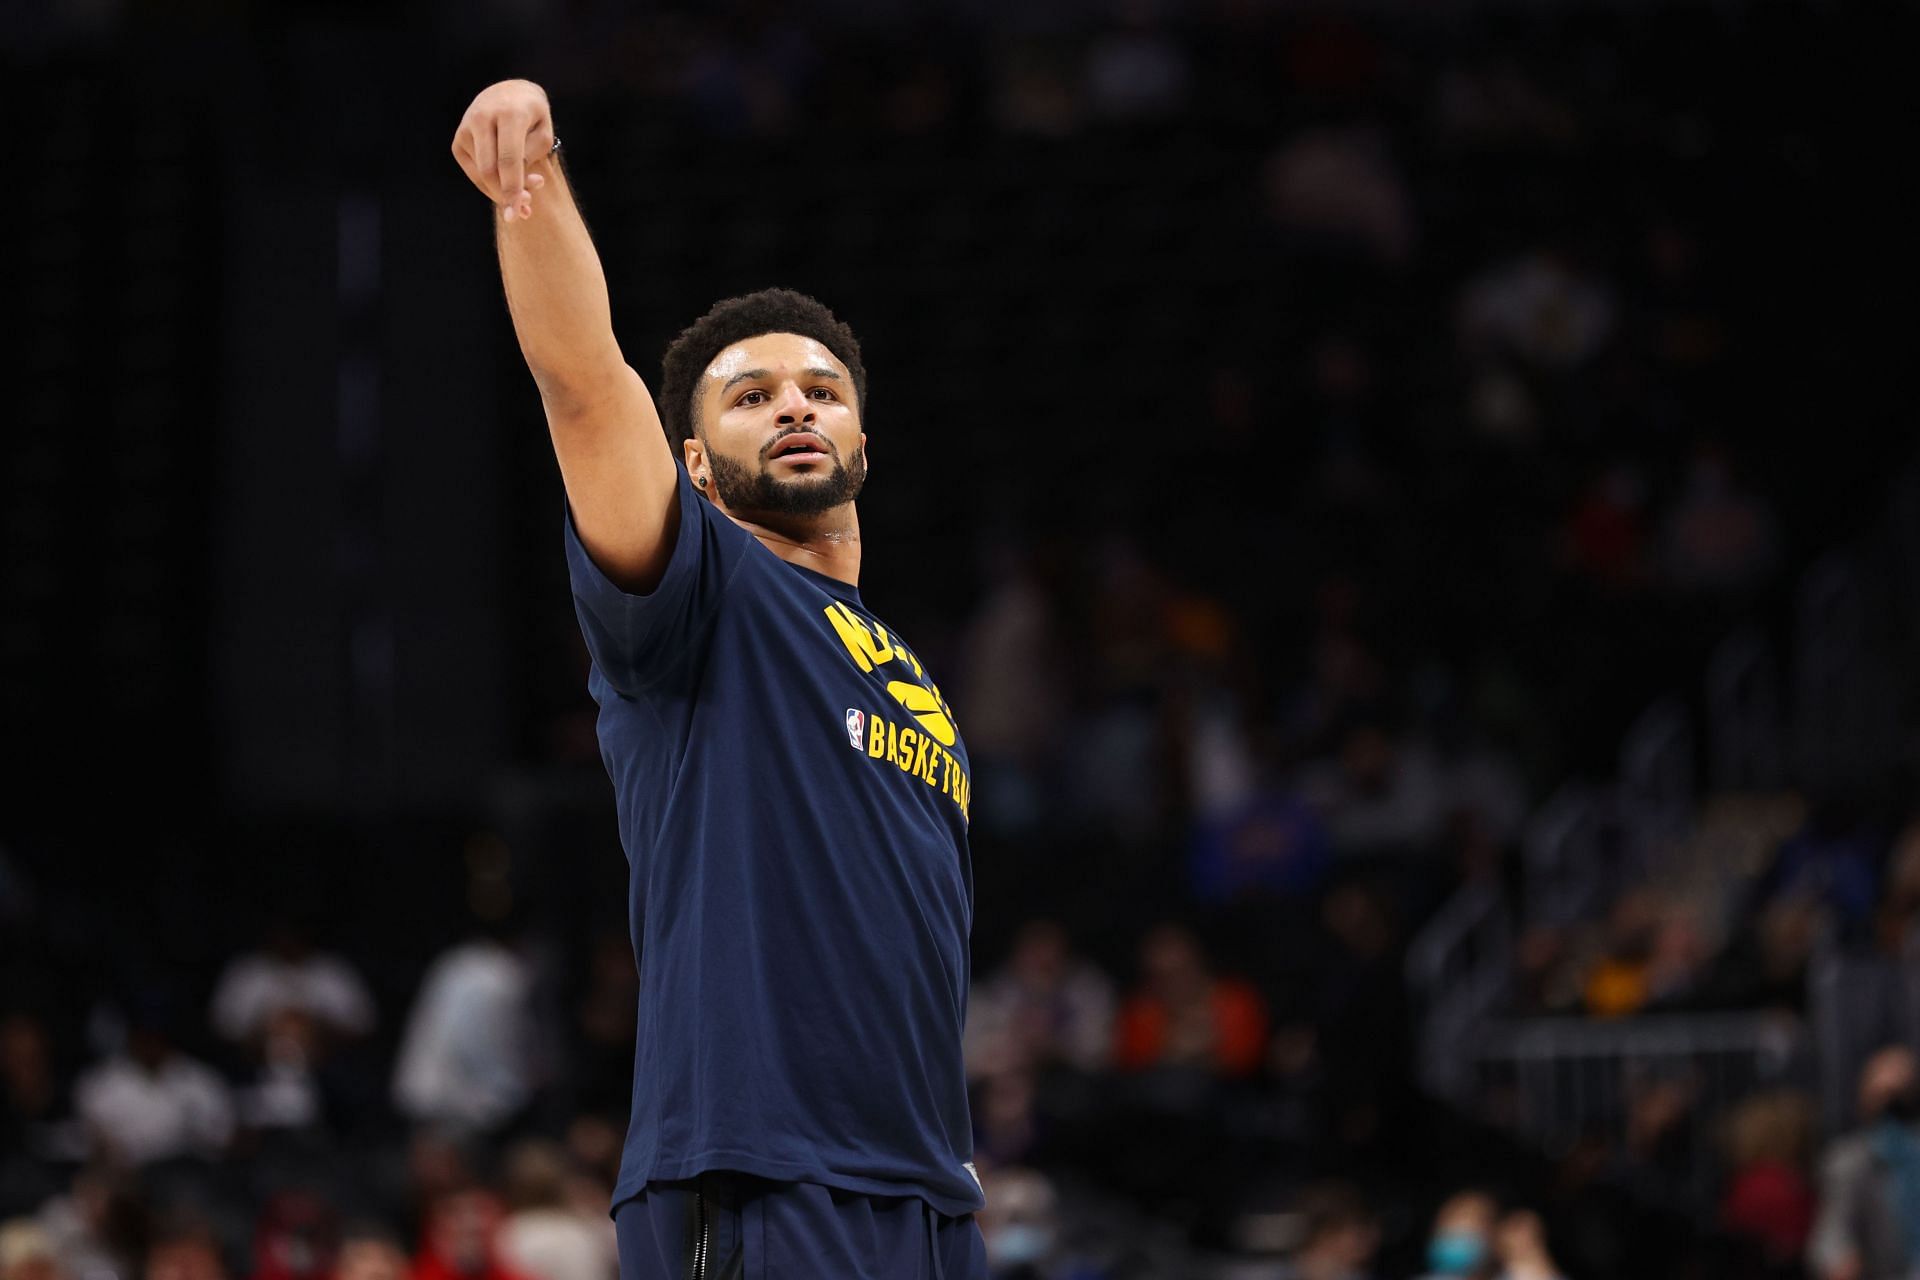 Jamal Murray of the Denver Nuggets practices before a game against the Portland Trail Blazers.